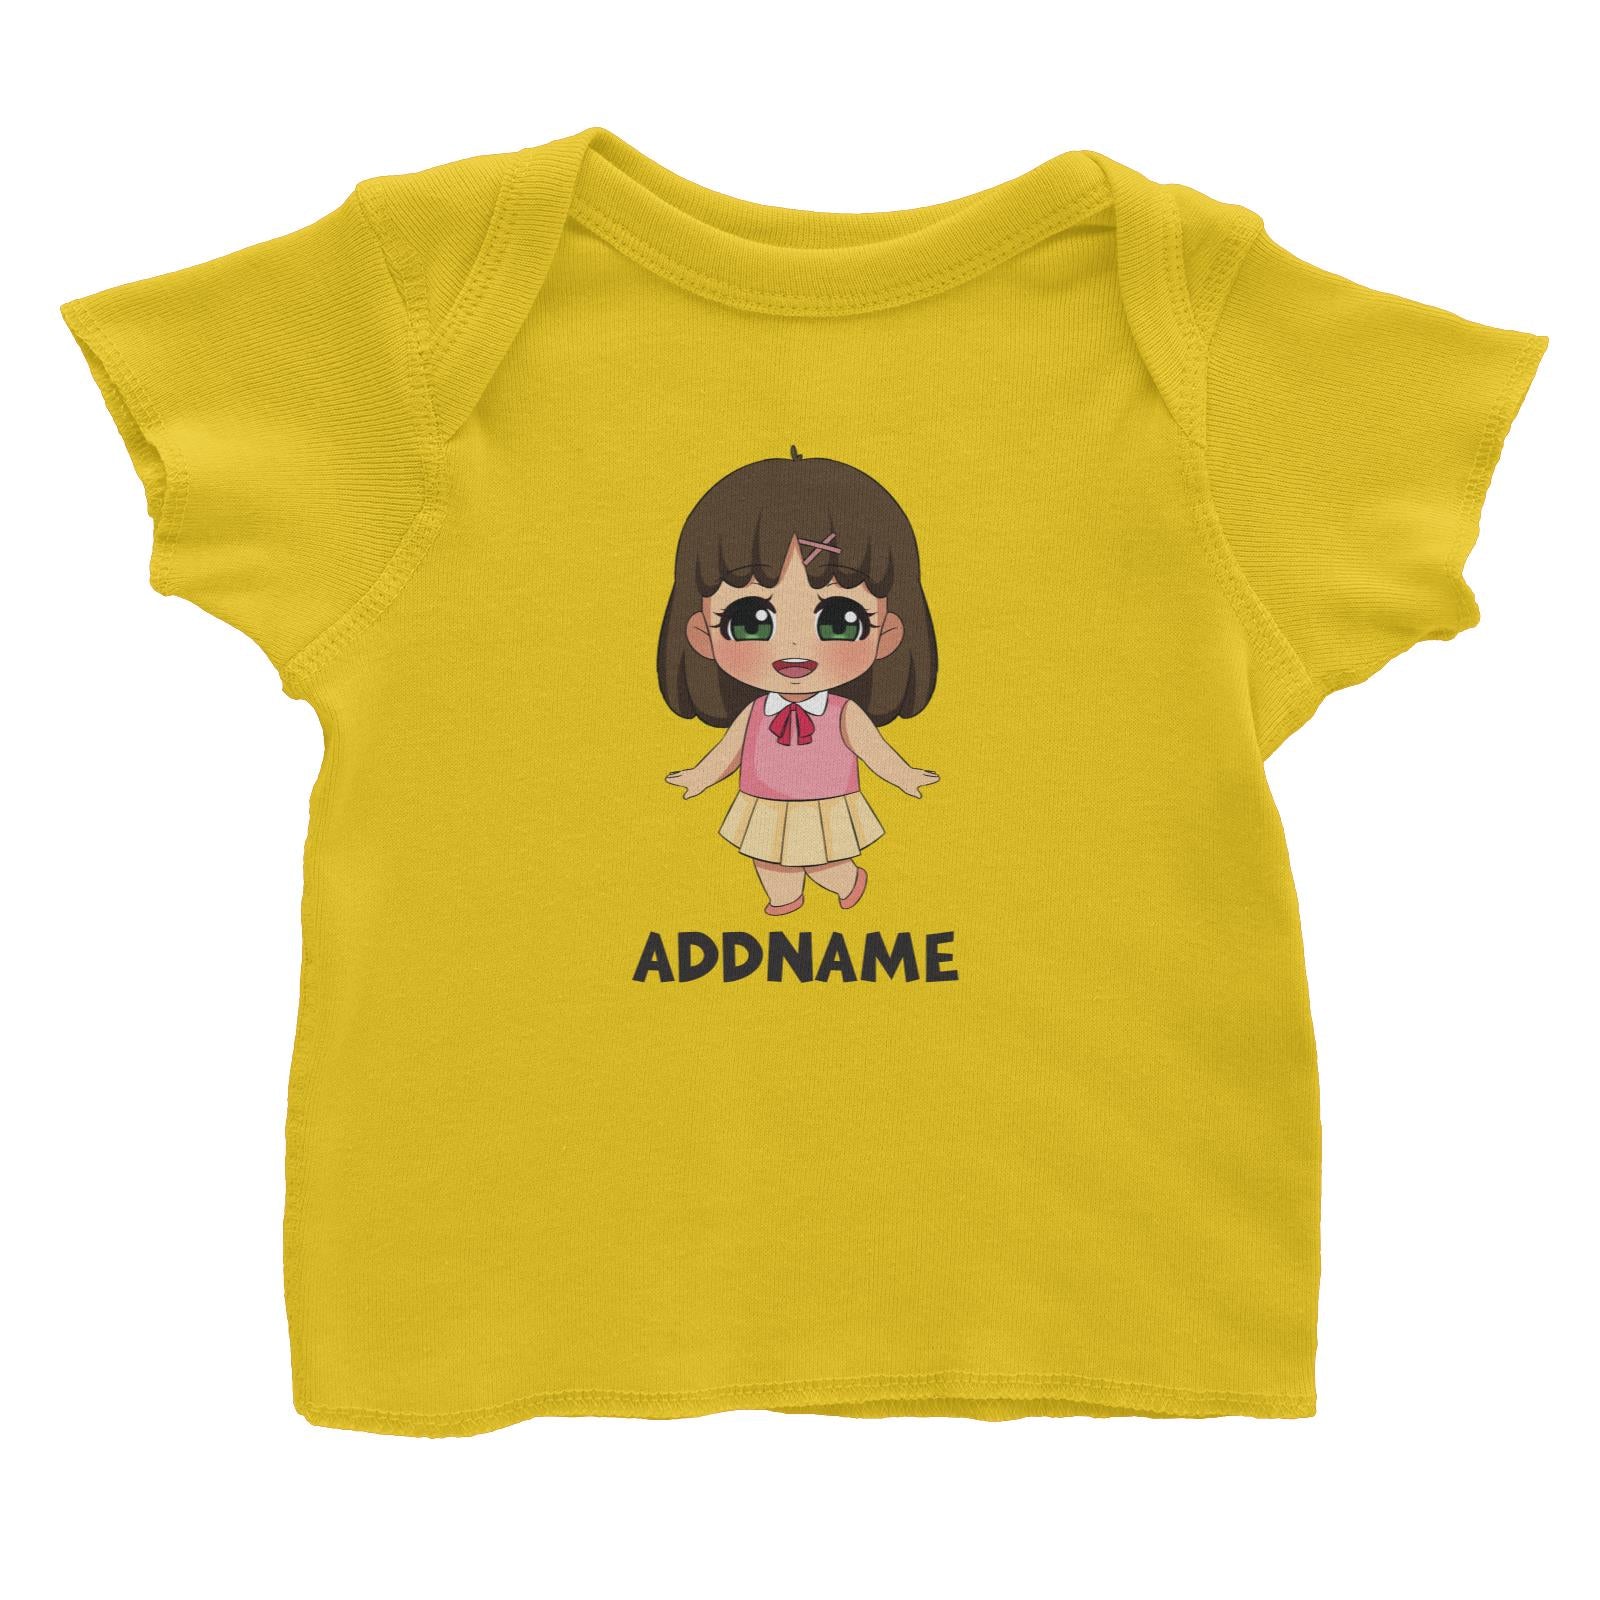 Children's Day Gift Series Little Chinese Girl Addname Baby T-Shirt